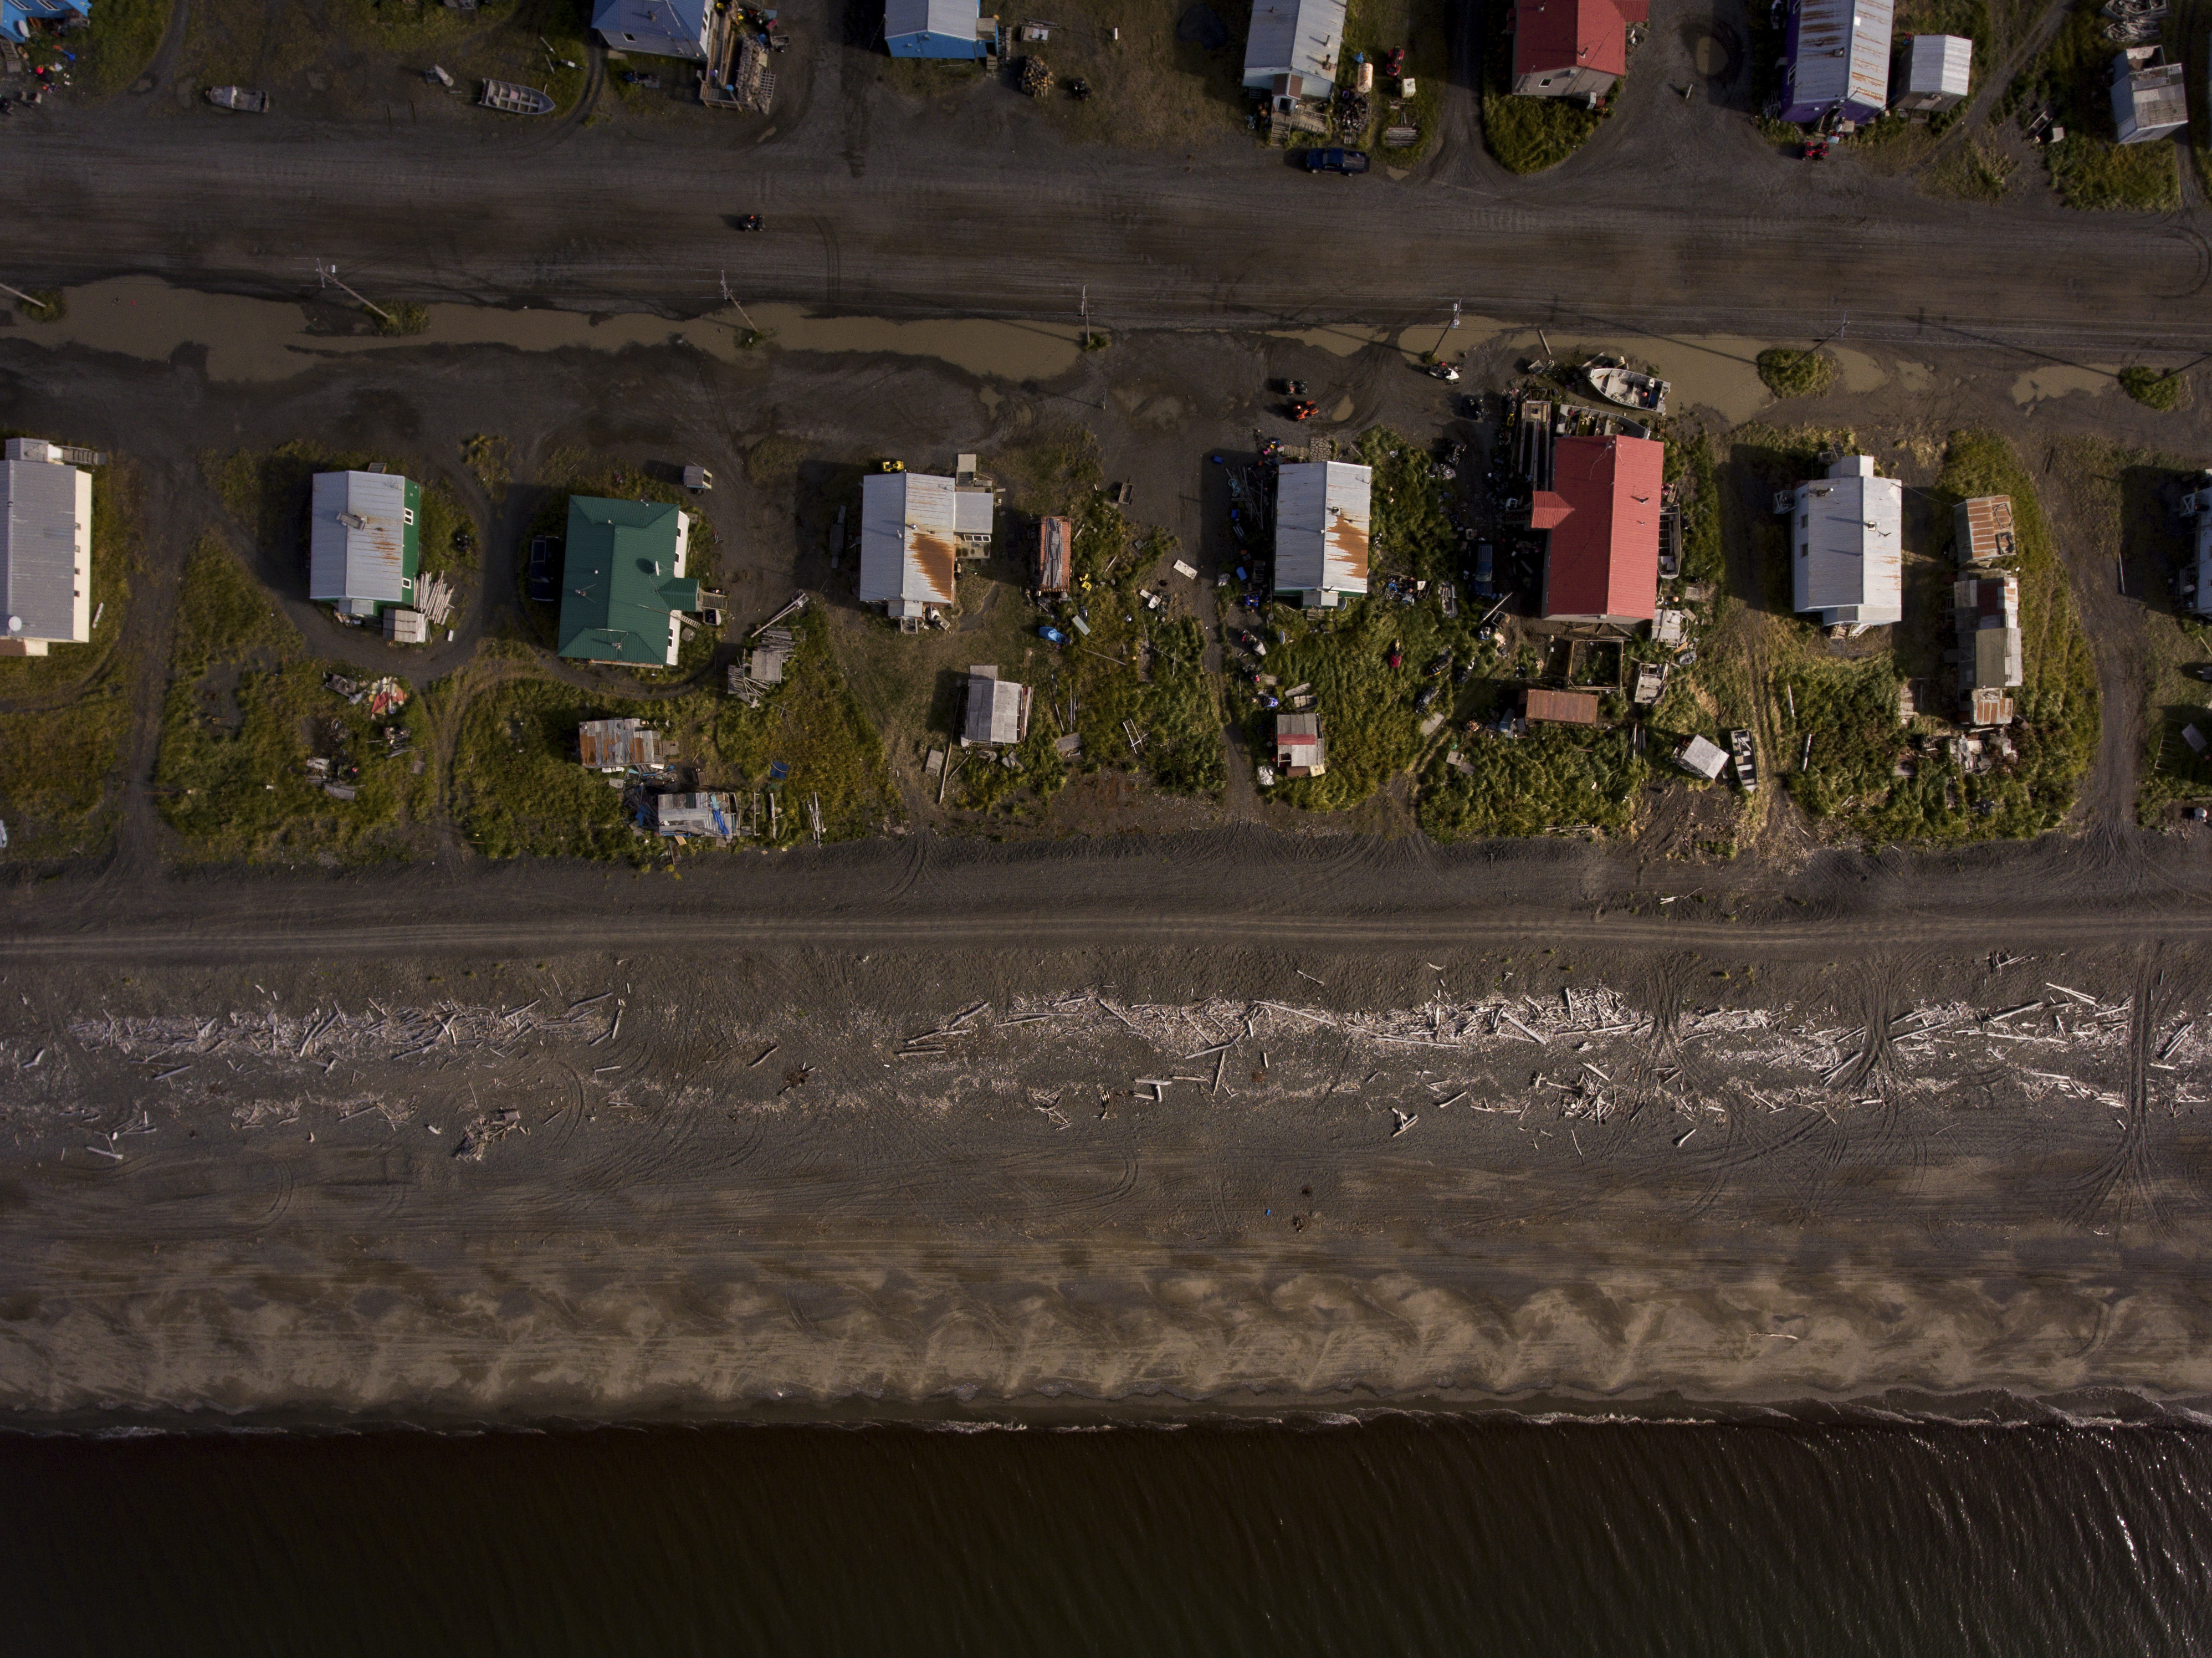 An aerial bird's eye view of homes on the ocean's edge in the Alaskan village of Shaktoolik, Sept. 17, 2016. Laid out on a narrow spit of sand between the Tagoomenik River and the Bering Sea, the village is facing an imminent threat from increased flooding and erosion, signs of a changing climate. (Josh Haner/The New York Times)